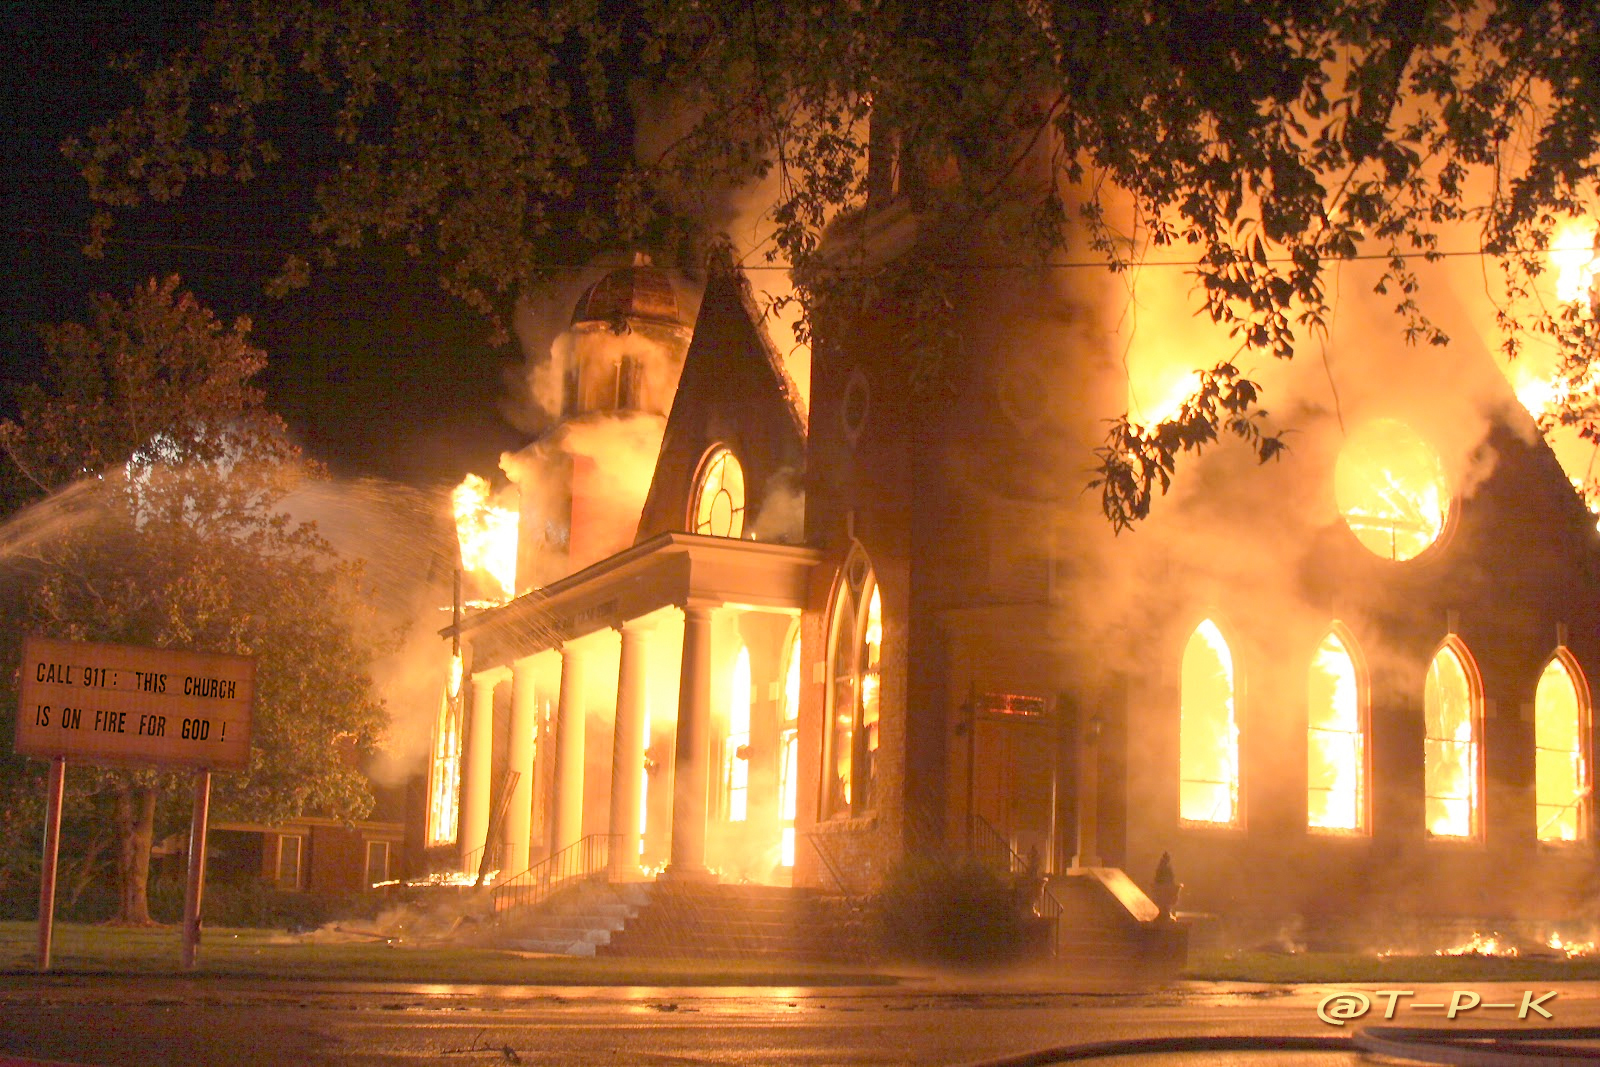 Call 911: this church is on fire for god! 